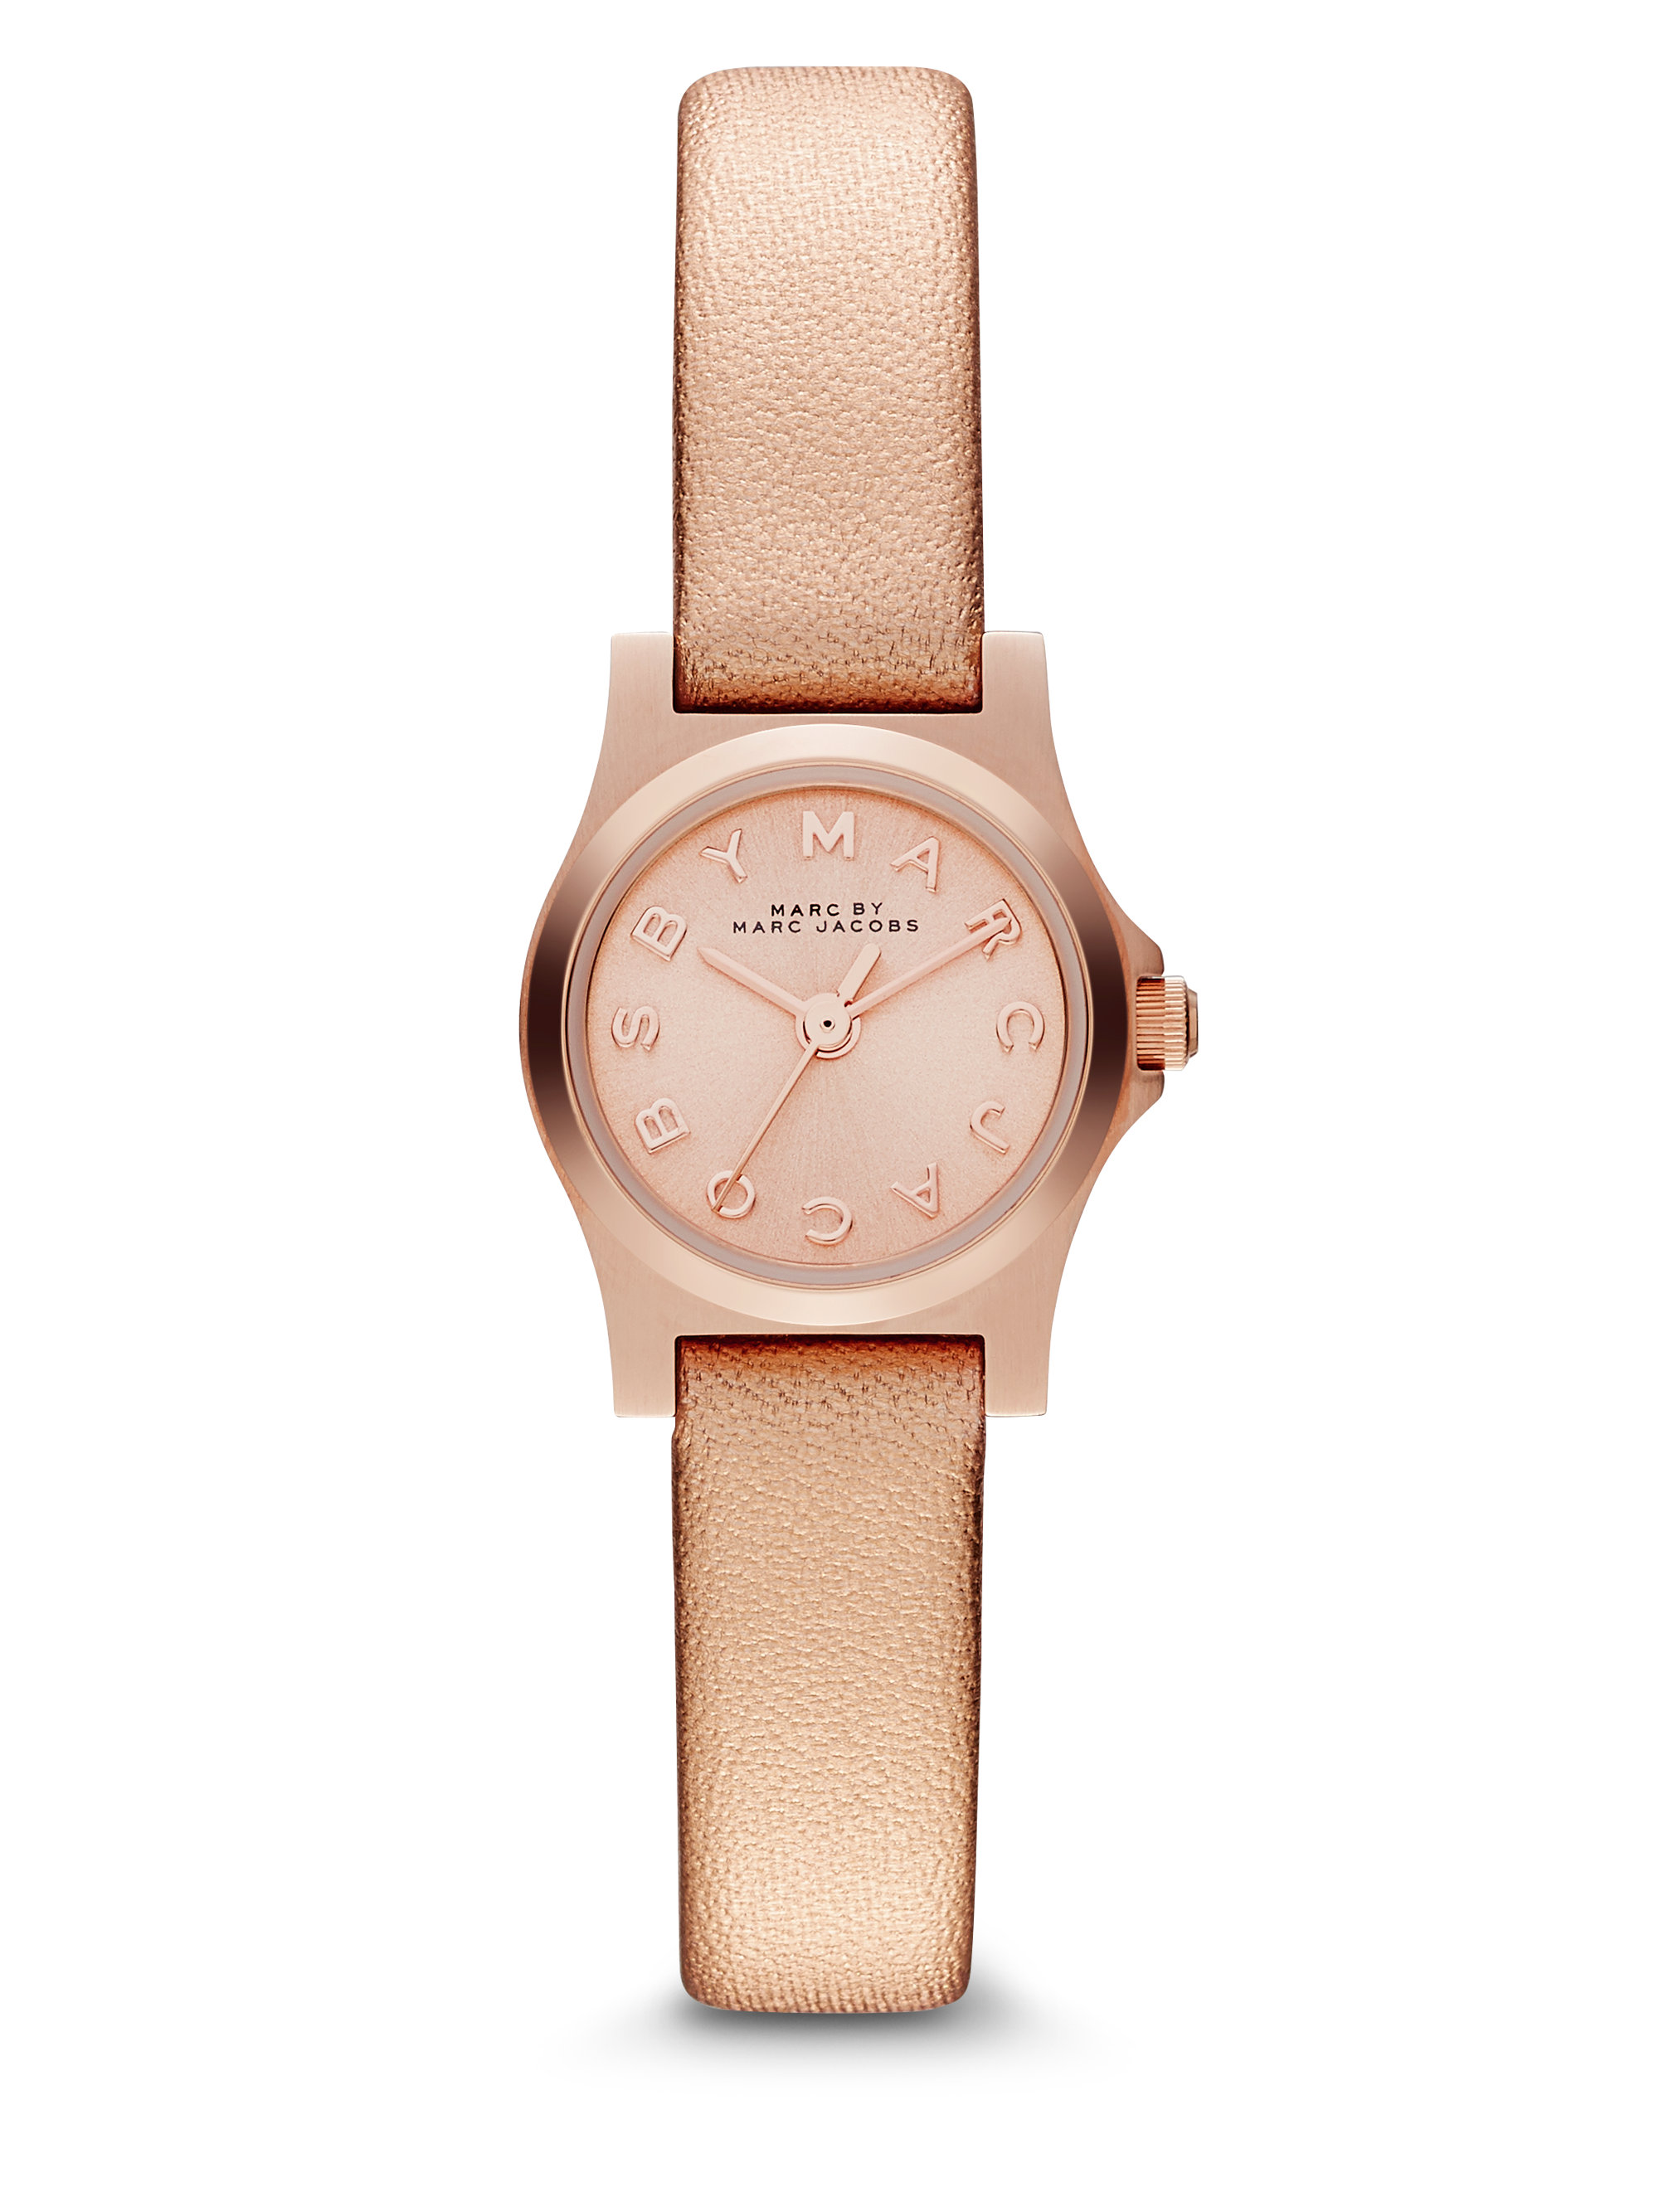 Lyst - Marc by marc jacobs Watch in Pink